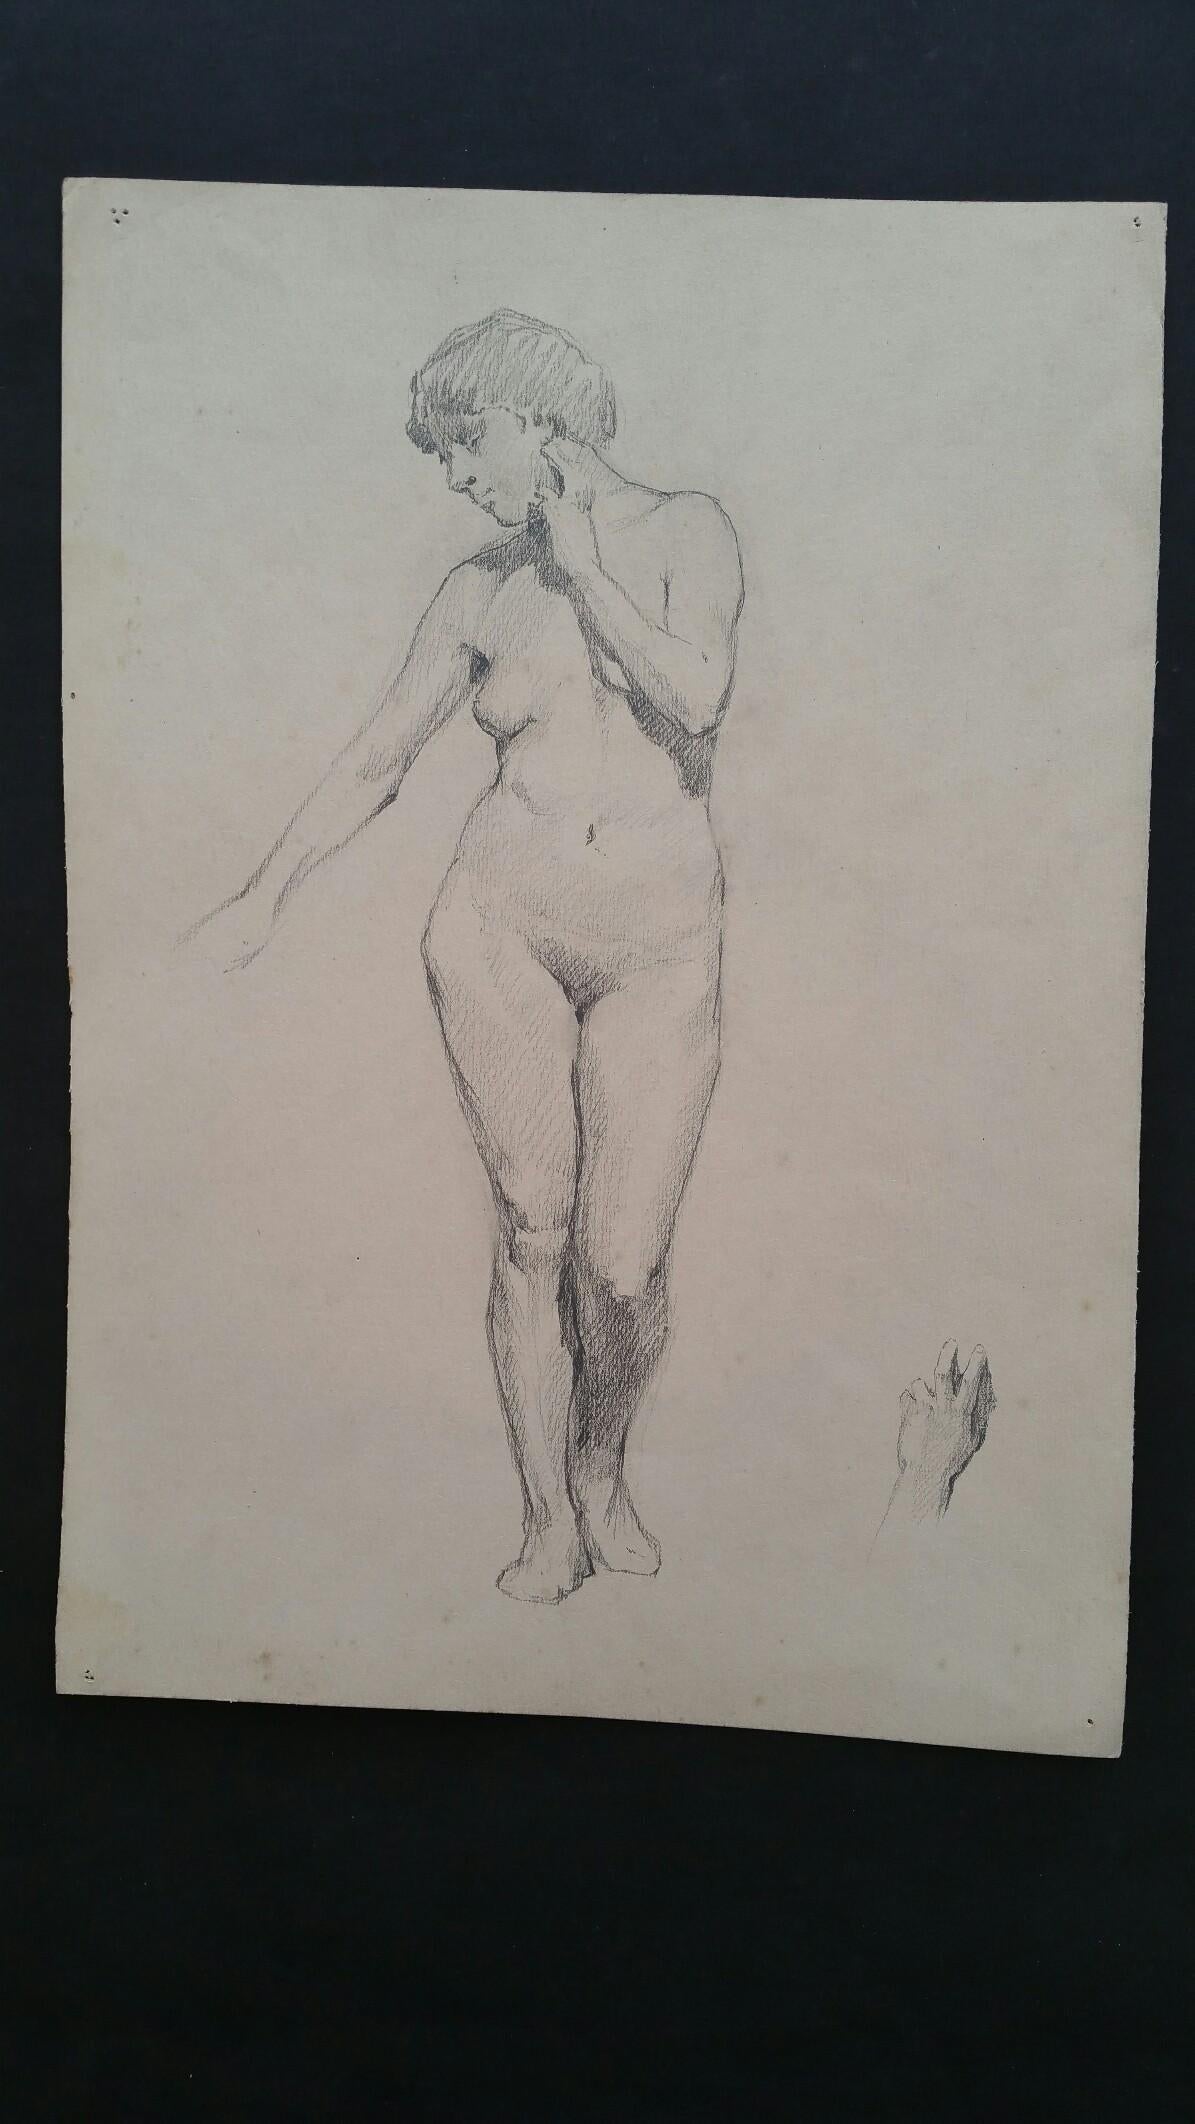 English graphite sketch of a female nude, standing.
by Henry George Moon (British 1857-1905).
on off white artists paper, unframed.
Measurements: sheet 14.75 x 10.5 inches.

Provenance: from the artists estate.

Condition report: pin holes to